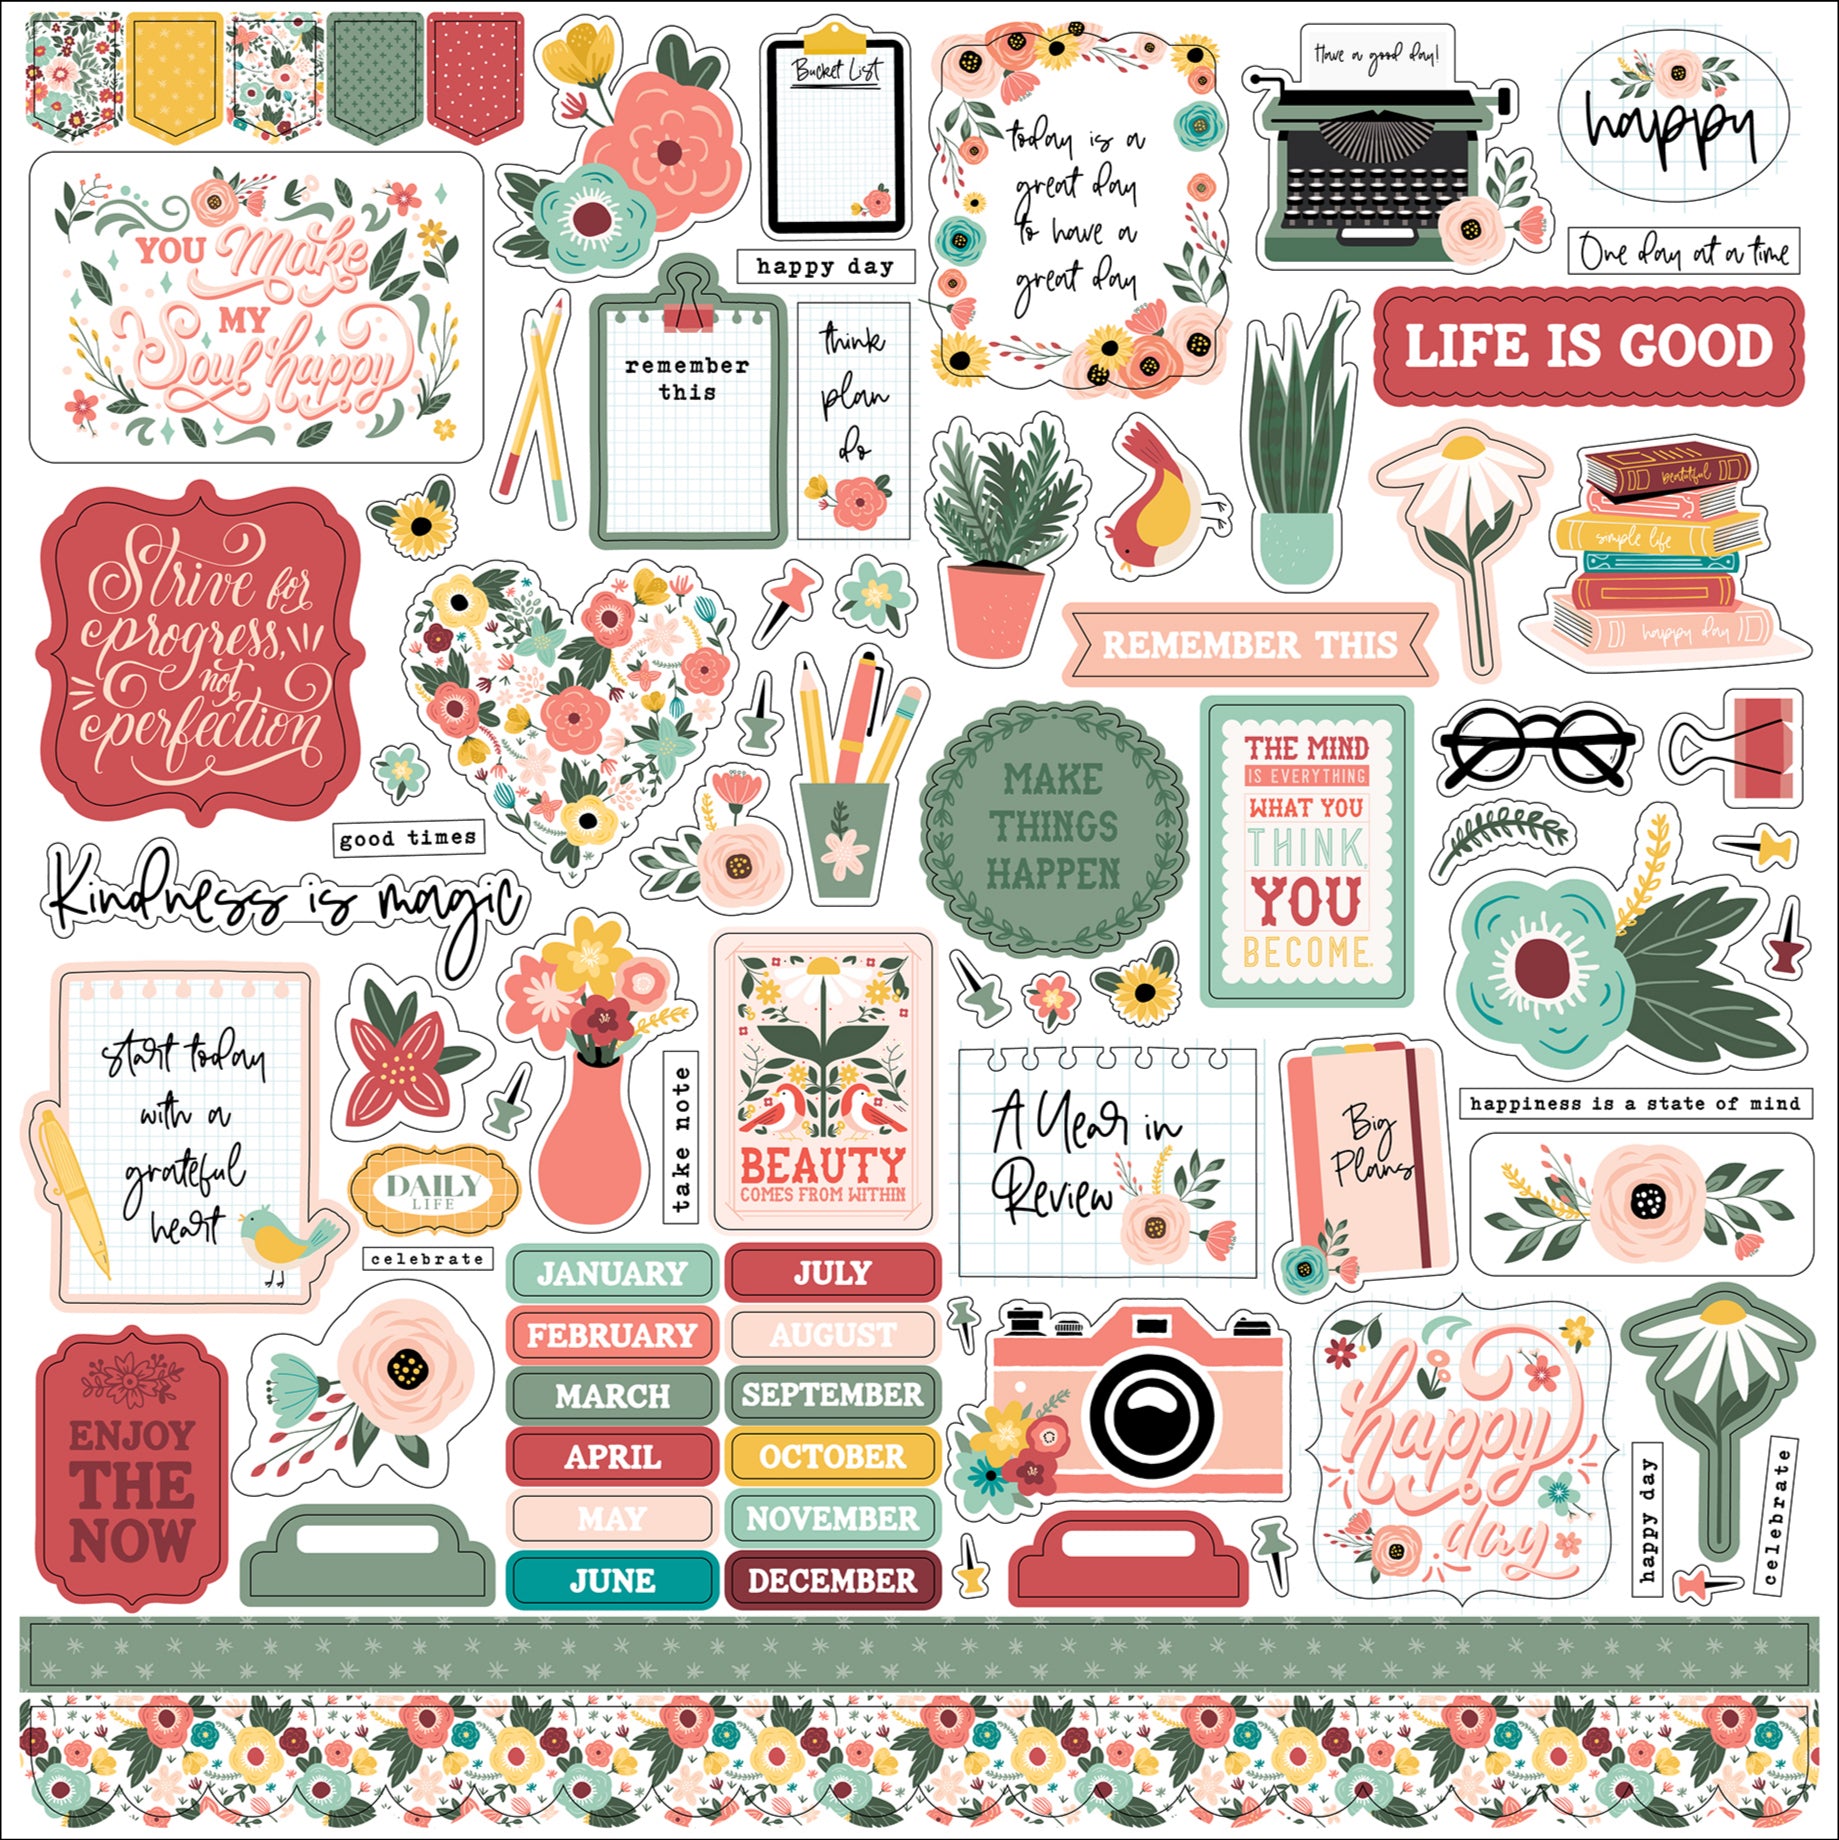 Year In Review Collection 12 x 12 Scrapbook Sticker Sheet by Echo Park Paper